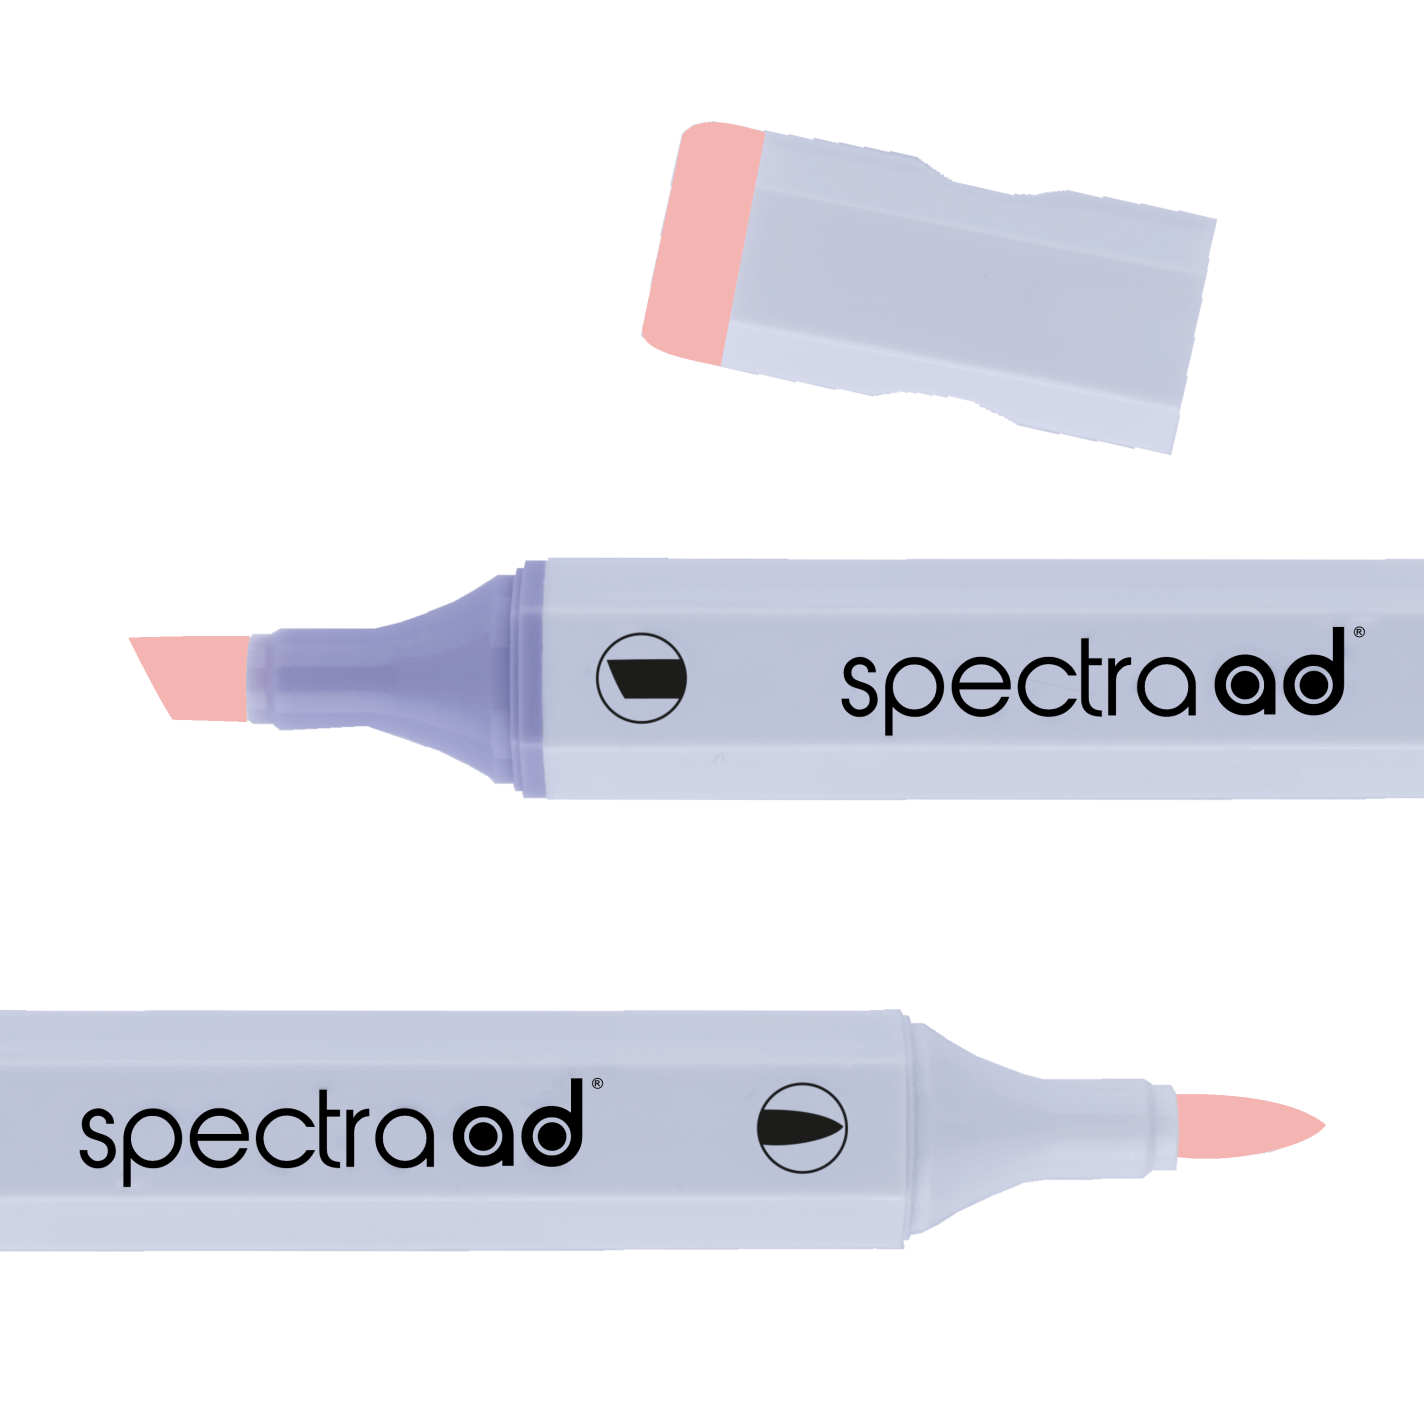 AD Marker Spectra Flamingo Pink